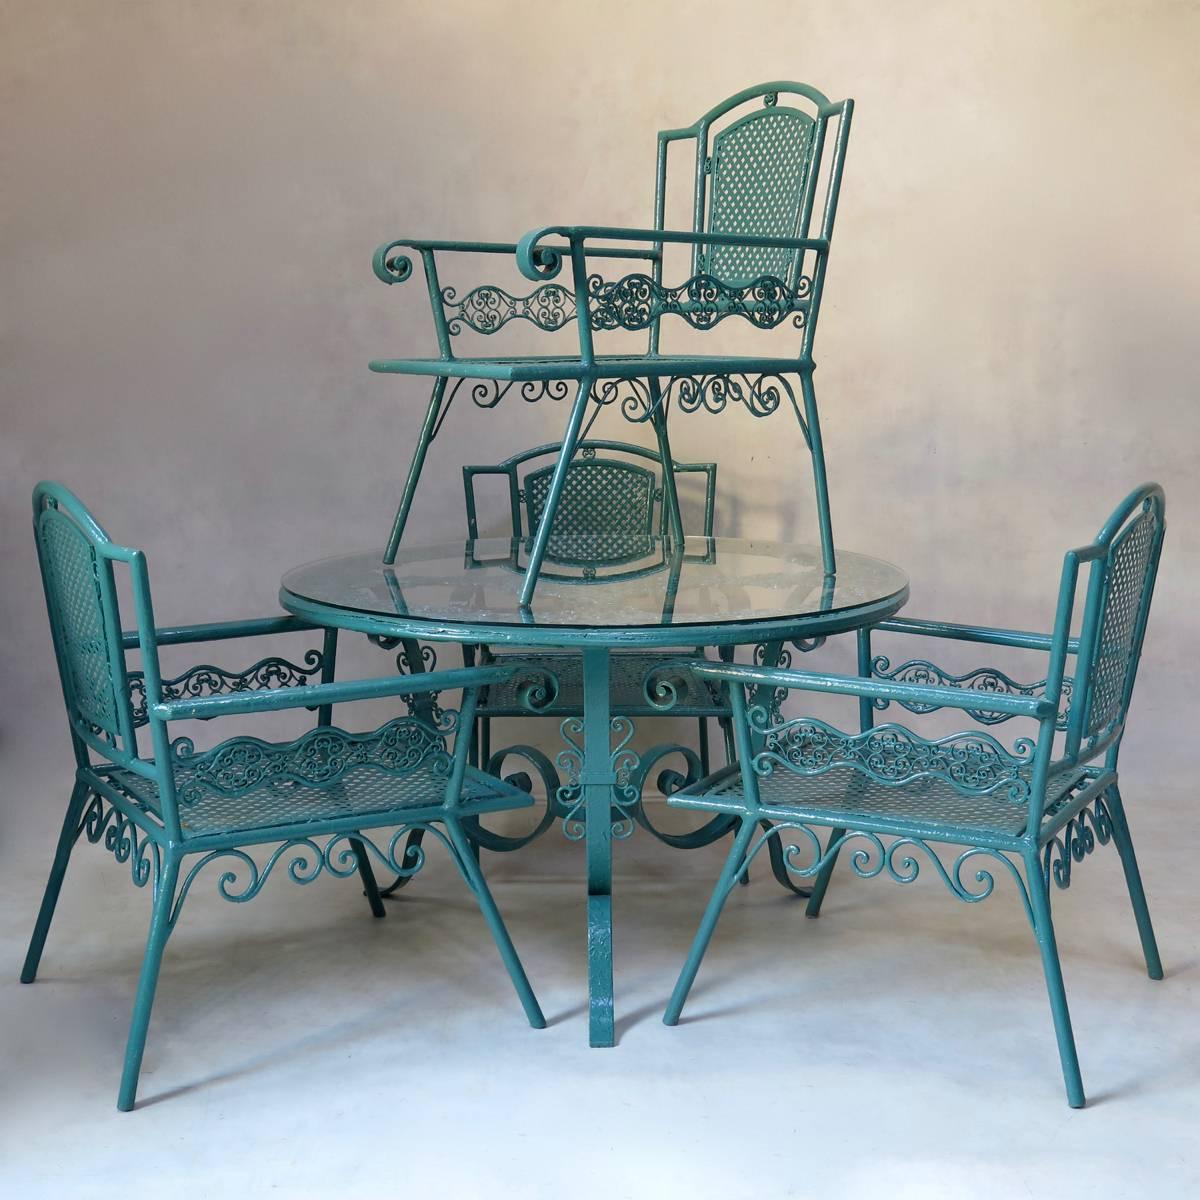 Absolutely gorgeous and one-of-a-kind outdoor iron set comprised of a round coffee table and four low and deep armchairs. Very pretty curlicued ironwork, with latticework in the backs and seats of the armchairs and lace-like ironwork throughout.